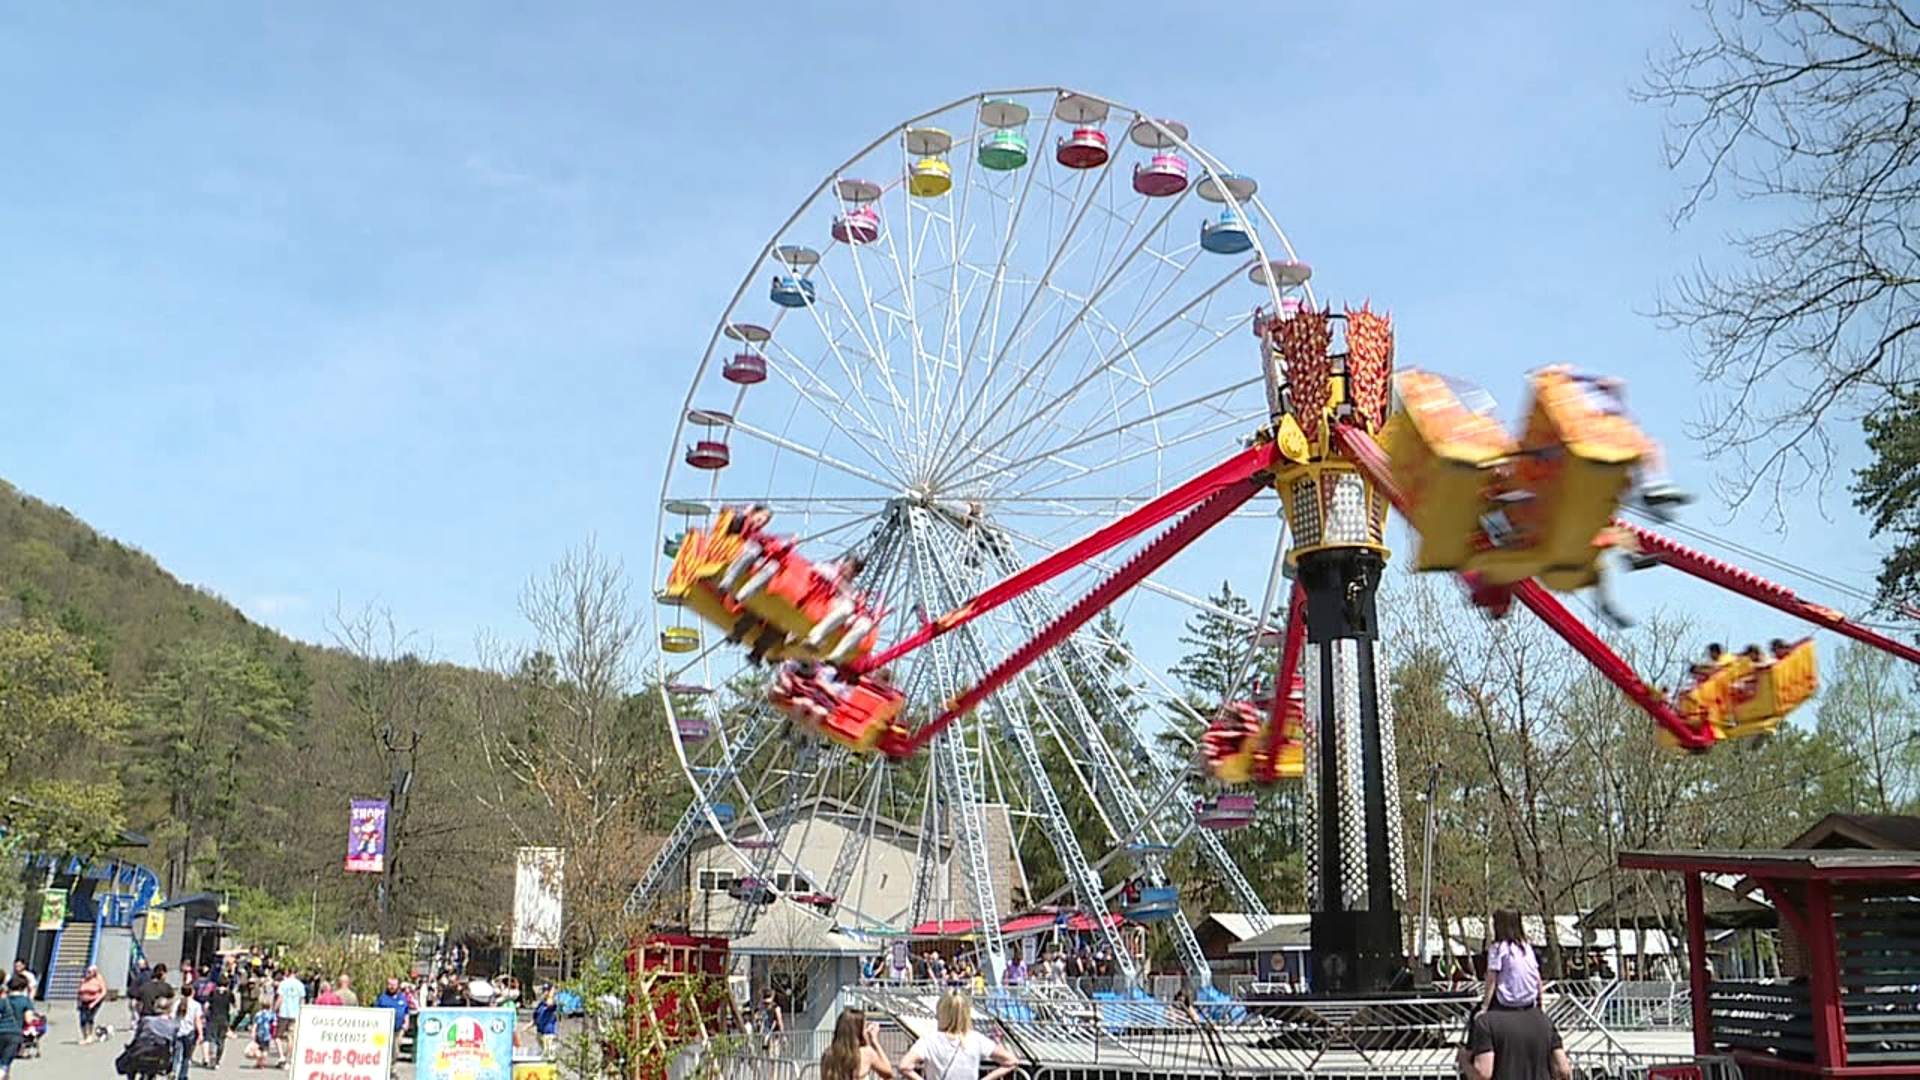 Knoebels Amusement Resort welcomed hundreds of families for a weekend full of food and thrills.